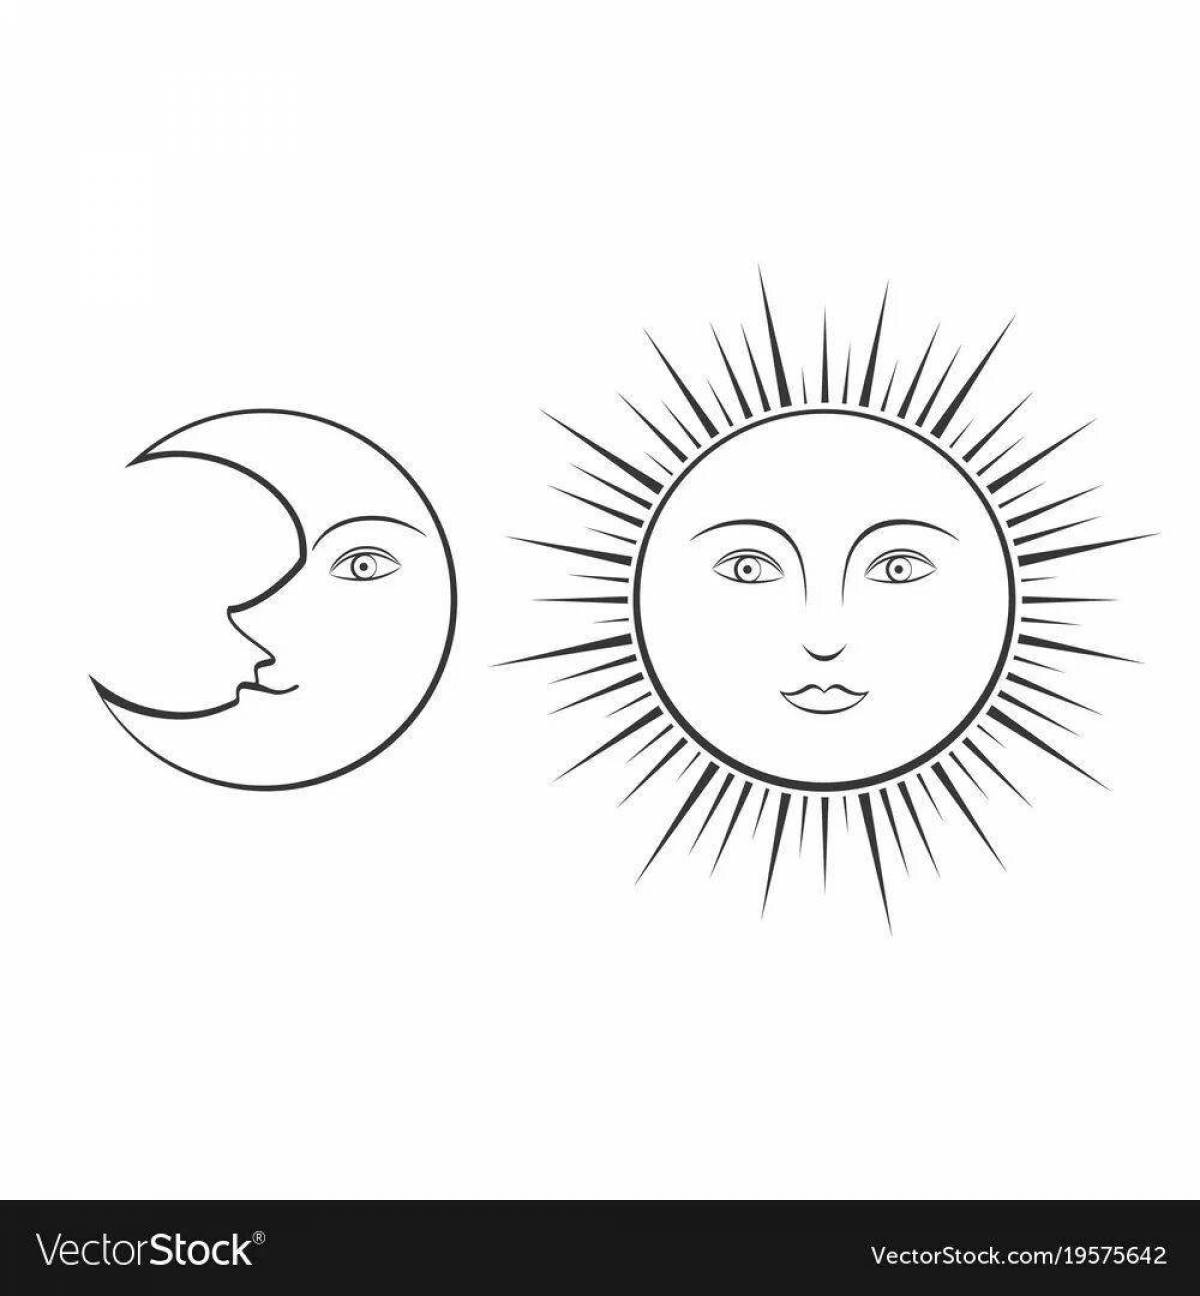 Moon and sun for kids #3